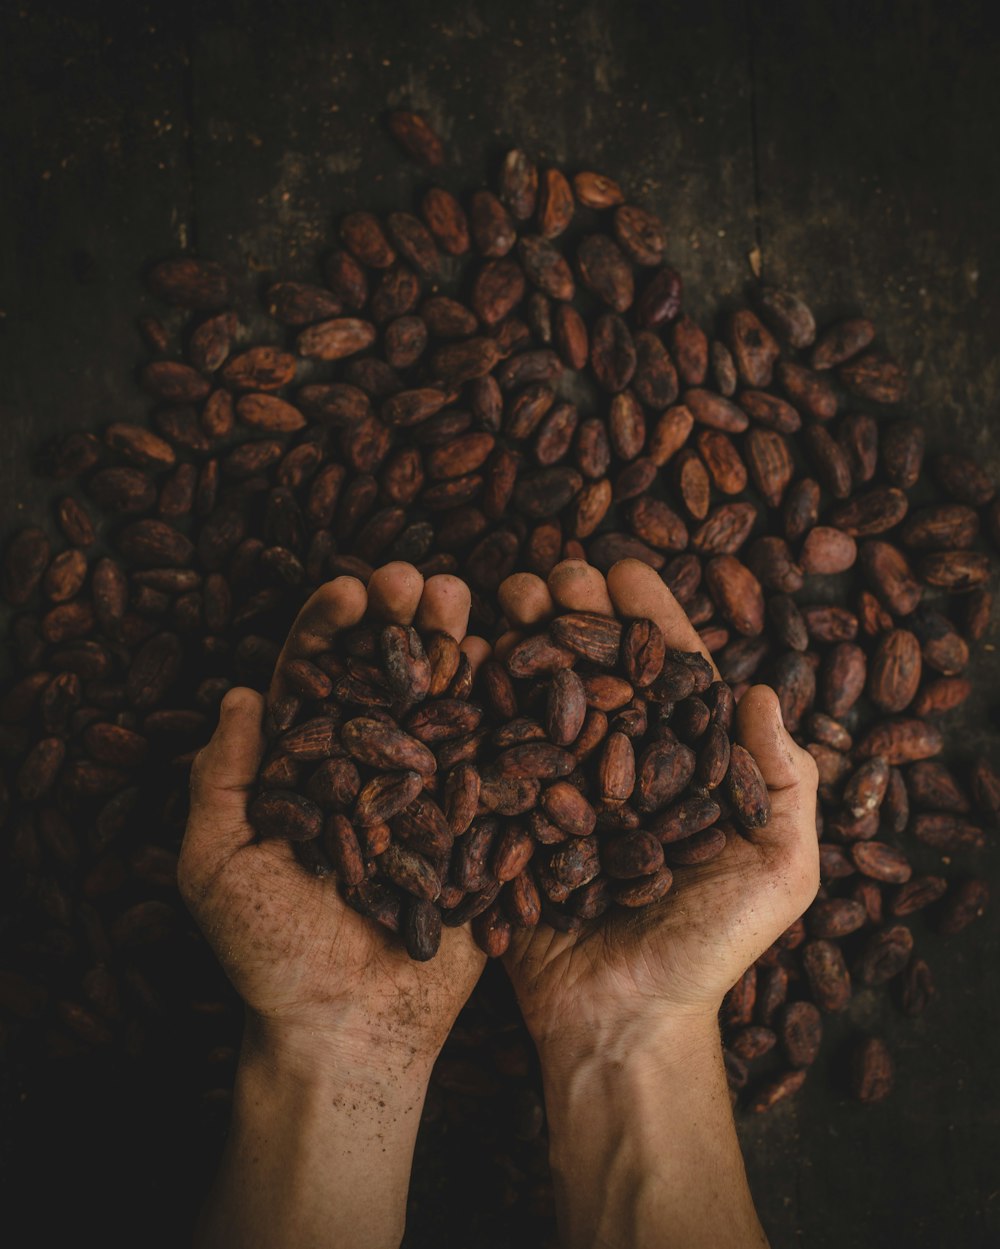 person holding dried beans